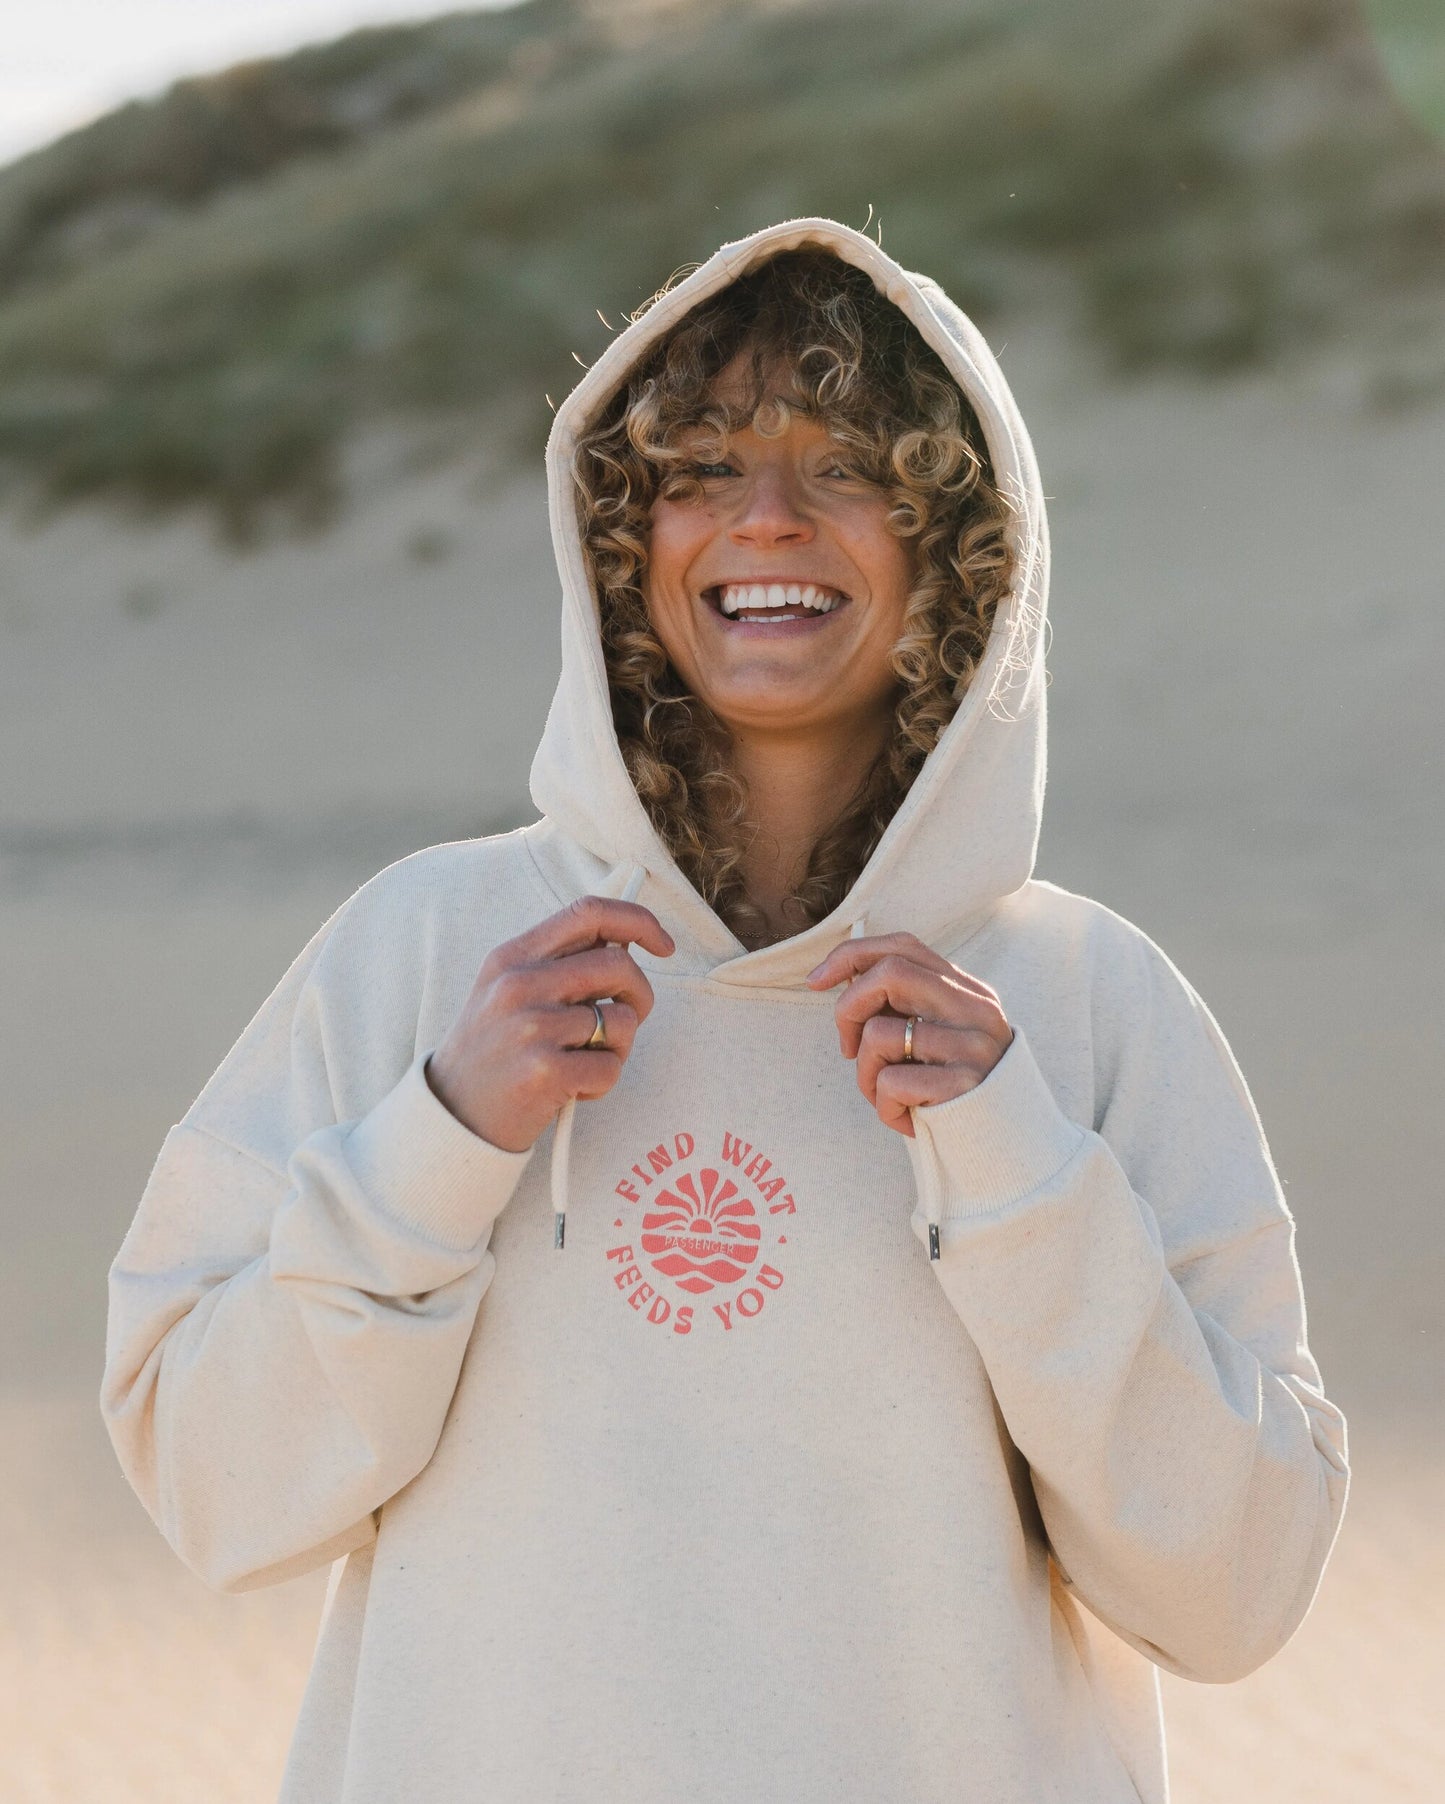 Discovery Recycled Cotton Hoodie - Milky Marl